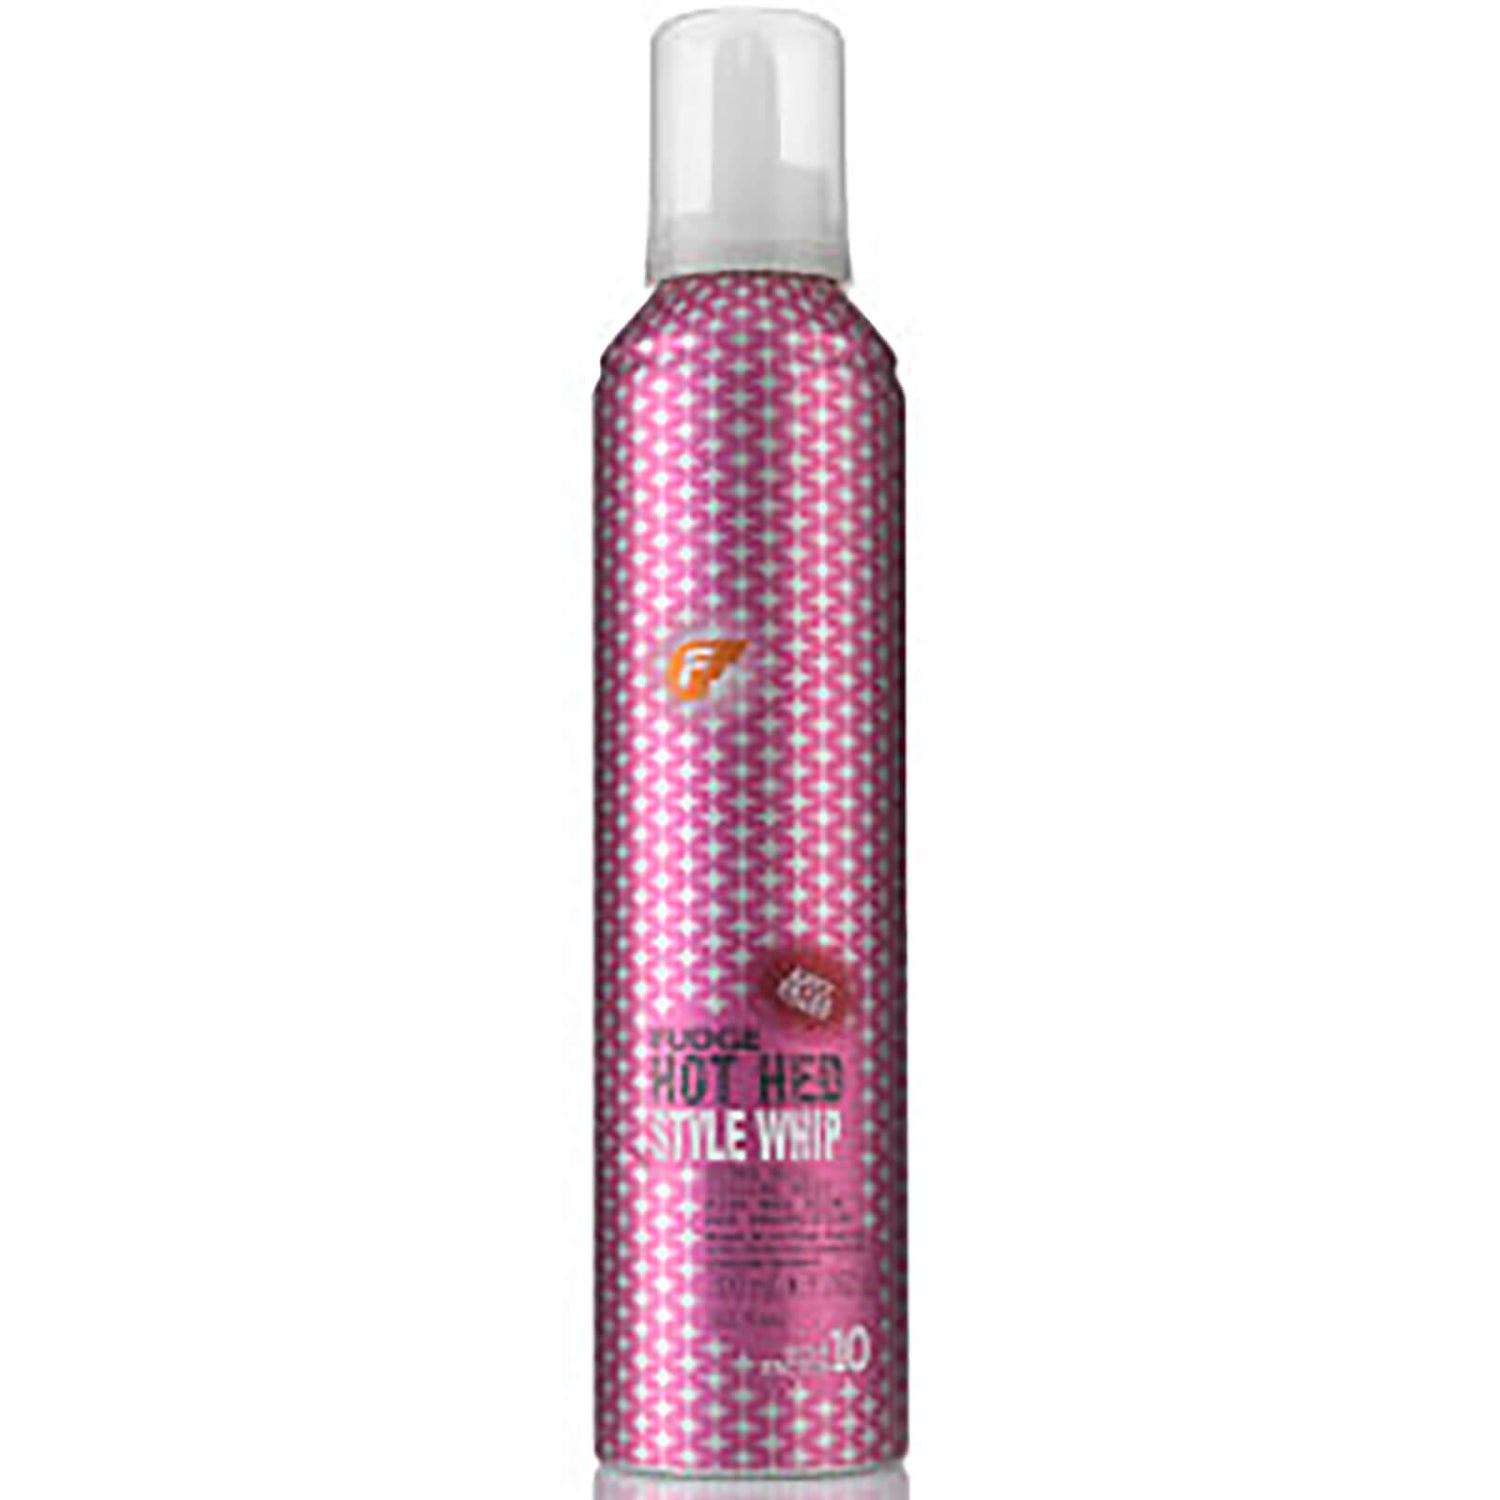 Fudge Hot Hed Styling Whip (Stylingmousse) 300ml